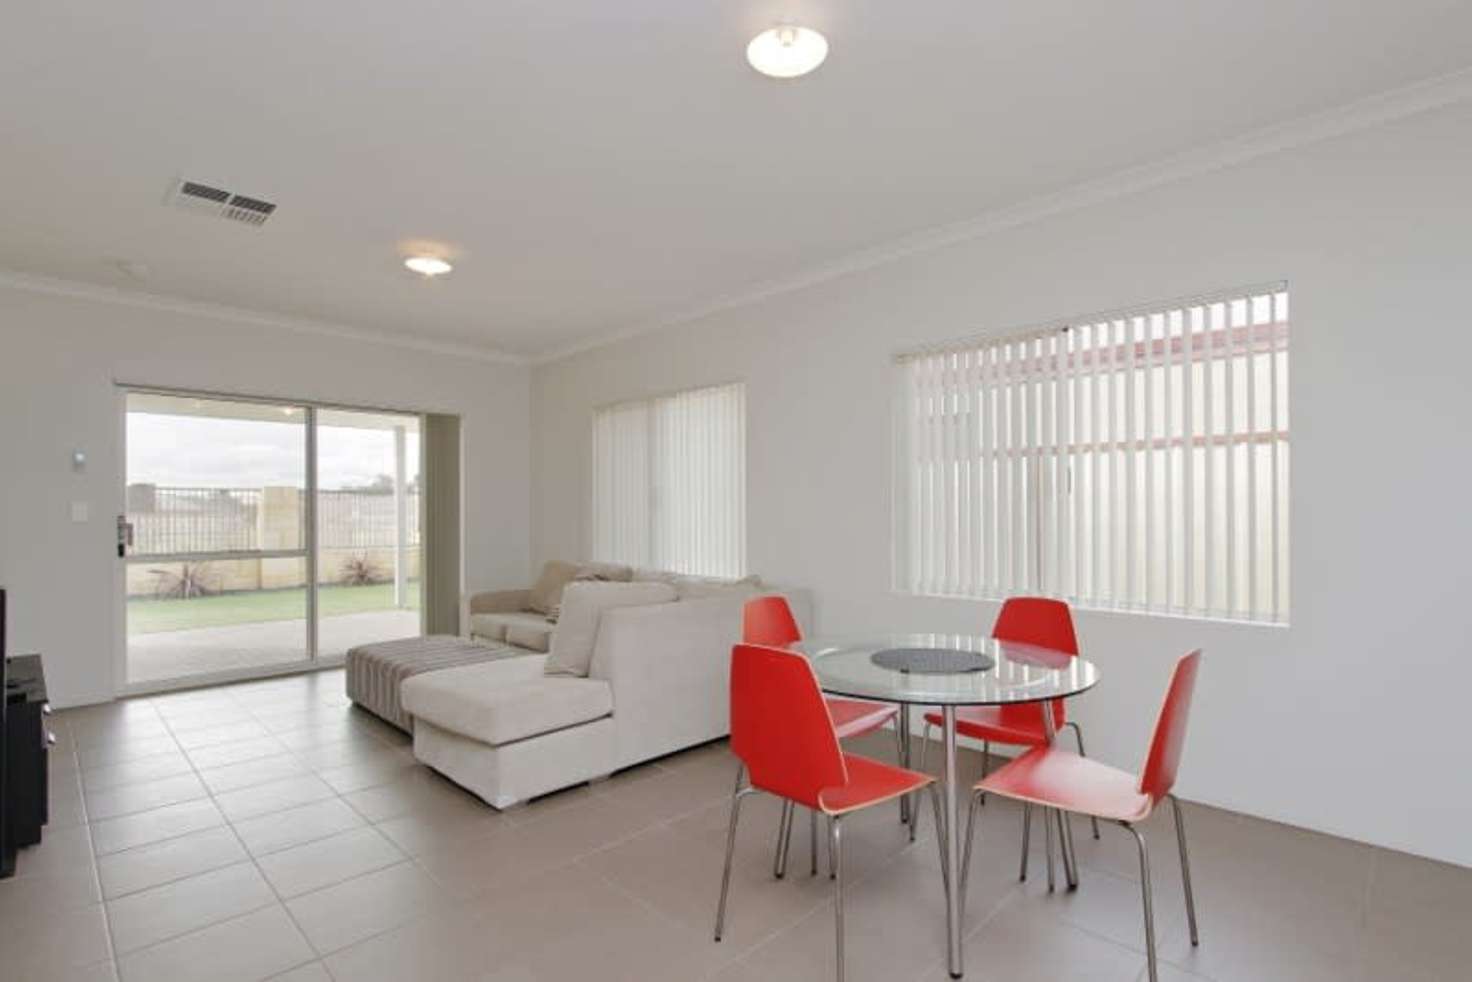 Main view of Homely house listing, 6 Willet Lane, Gosnells WA 6110